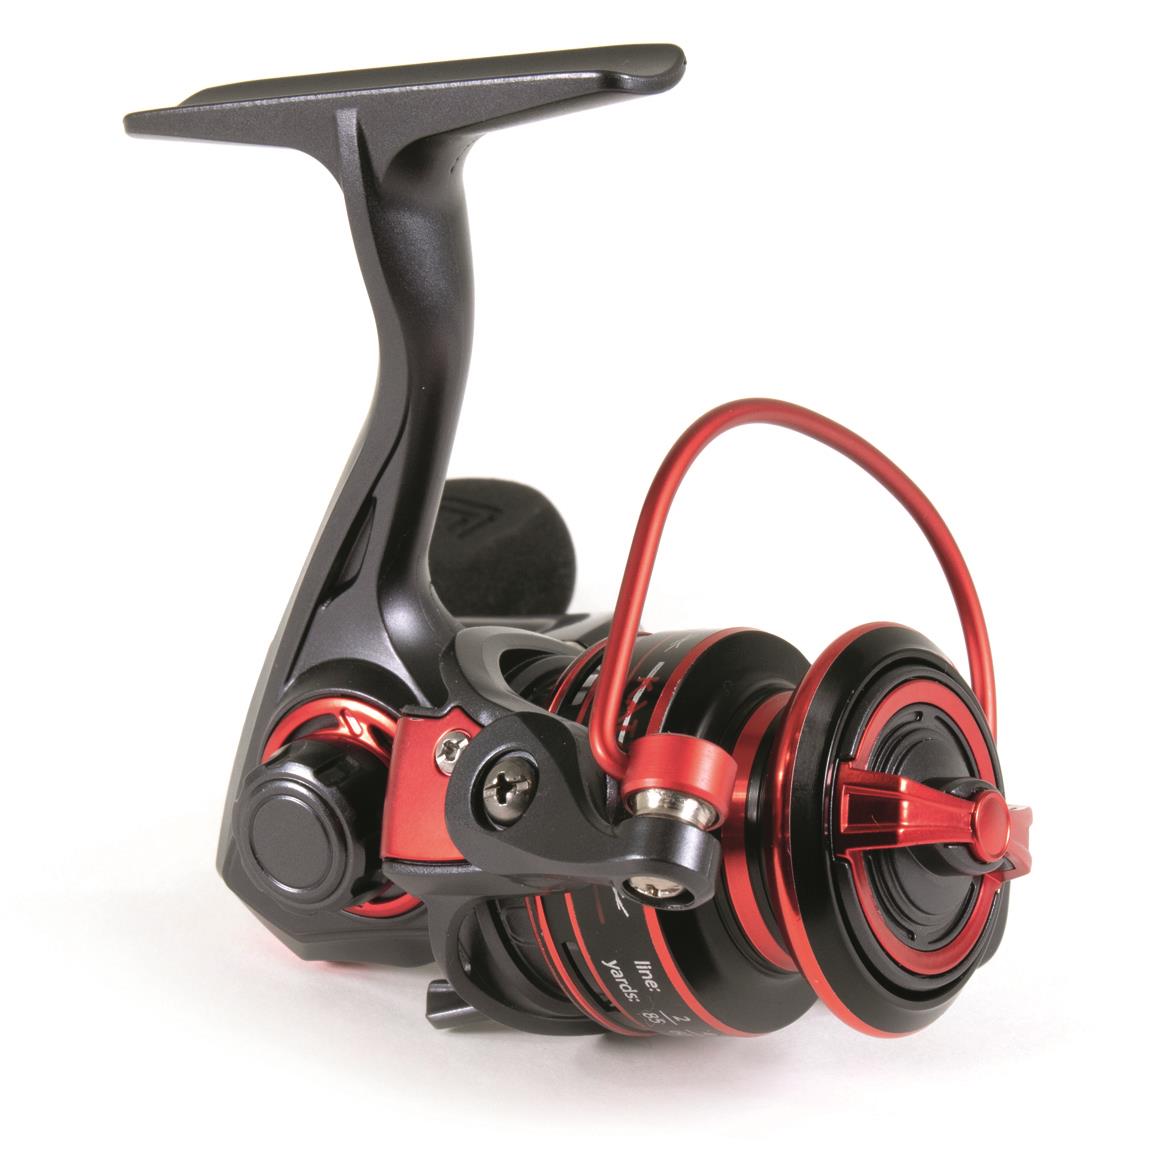 13 Fishing Descent Aluminum Inline Ice Fishing Reels - 735077, Ice Fishing  Reels at Sportsman's Guide